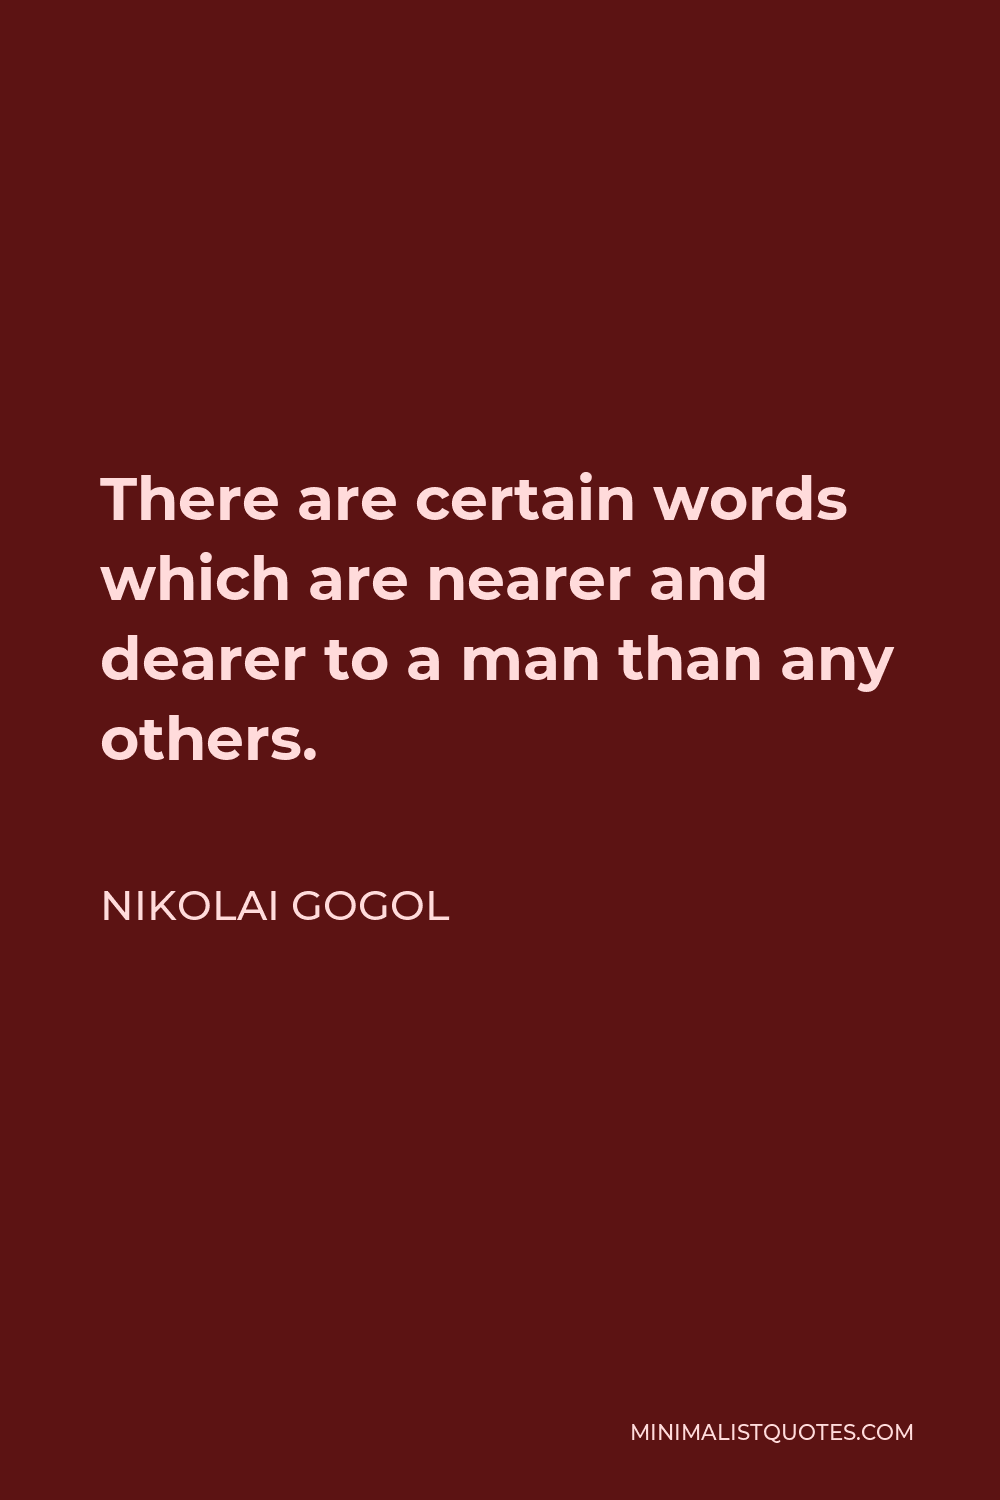 Nikolai Gogol Quote - There are certain words which are nearer and dearer to a man than any others.